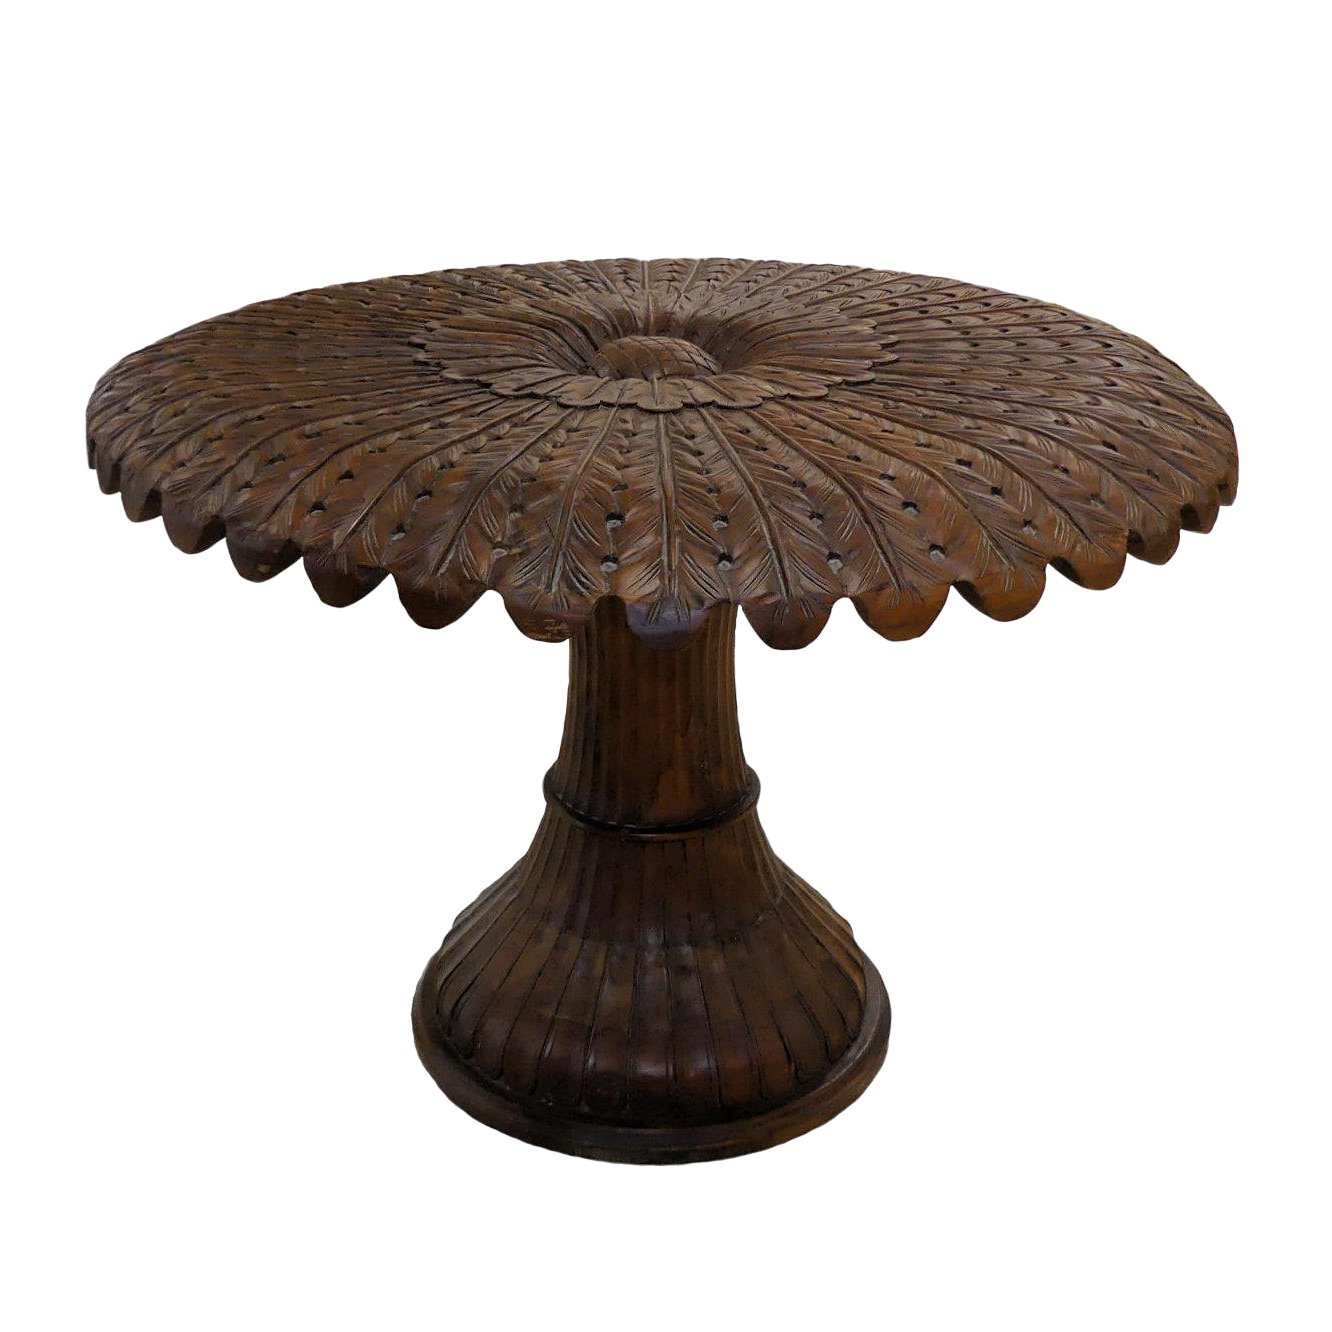 vintage carved wood pedestal dining table base accent chairish brown living room furniture gold pieces leick end tables circular tablecloth outdoor nic chairs white cloth napkins